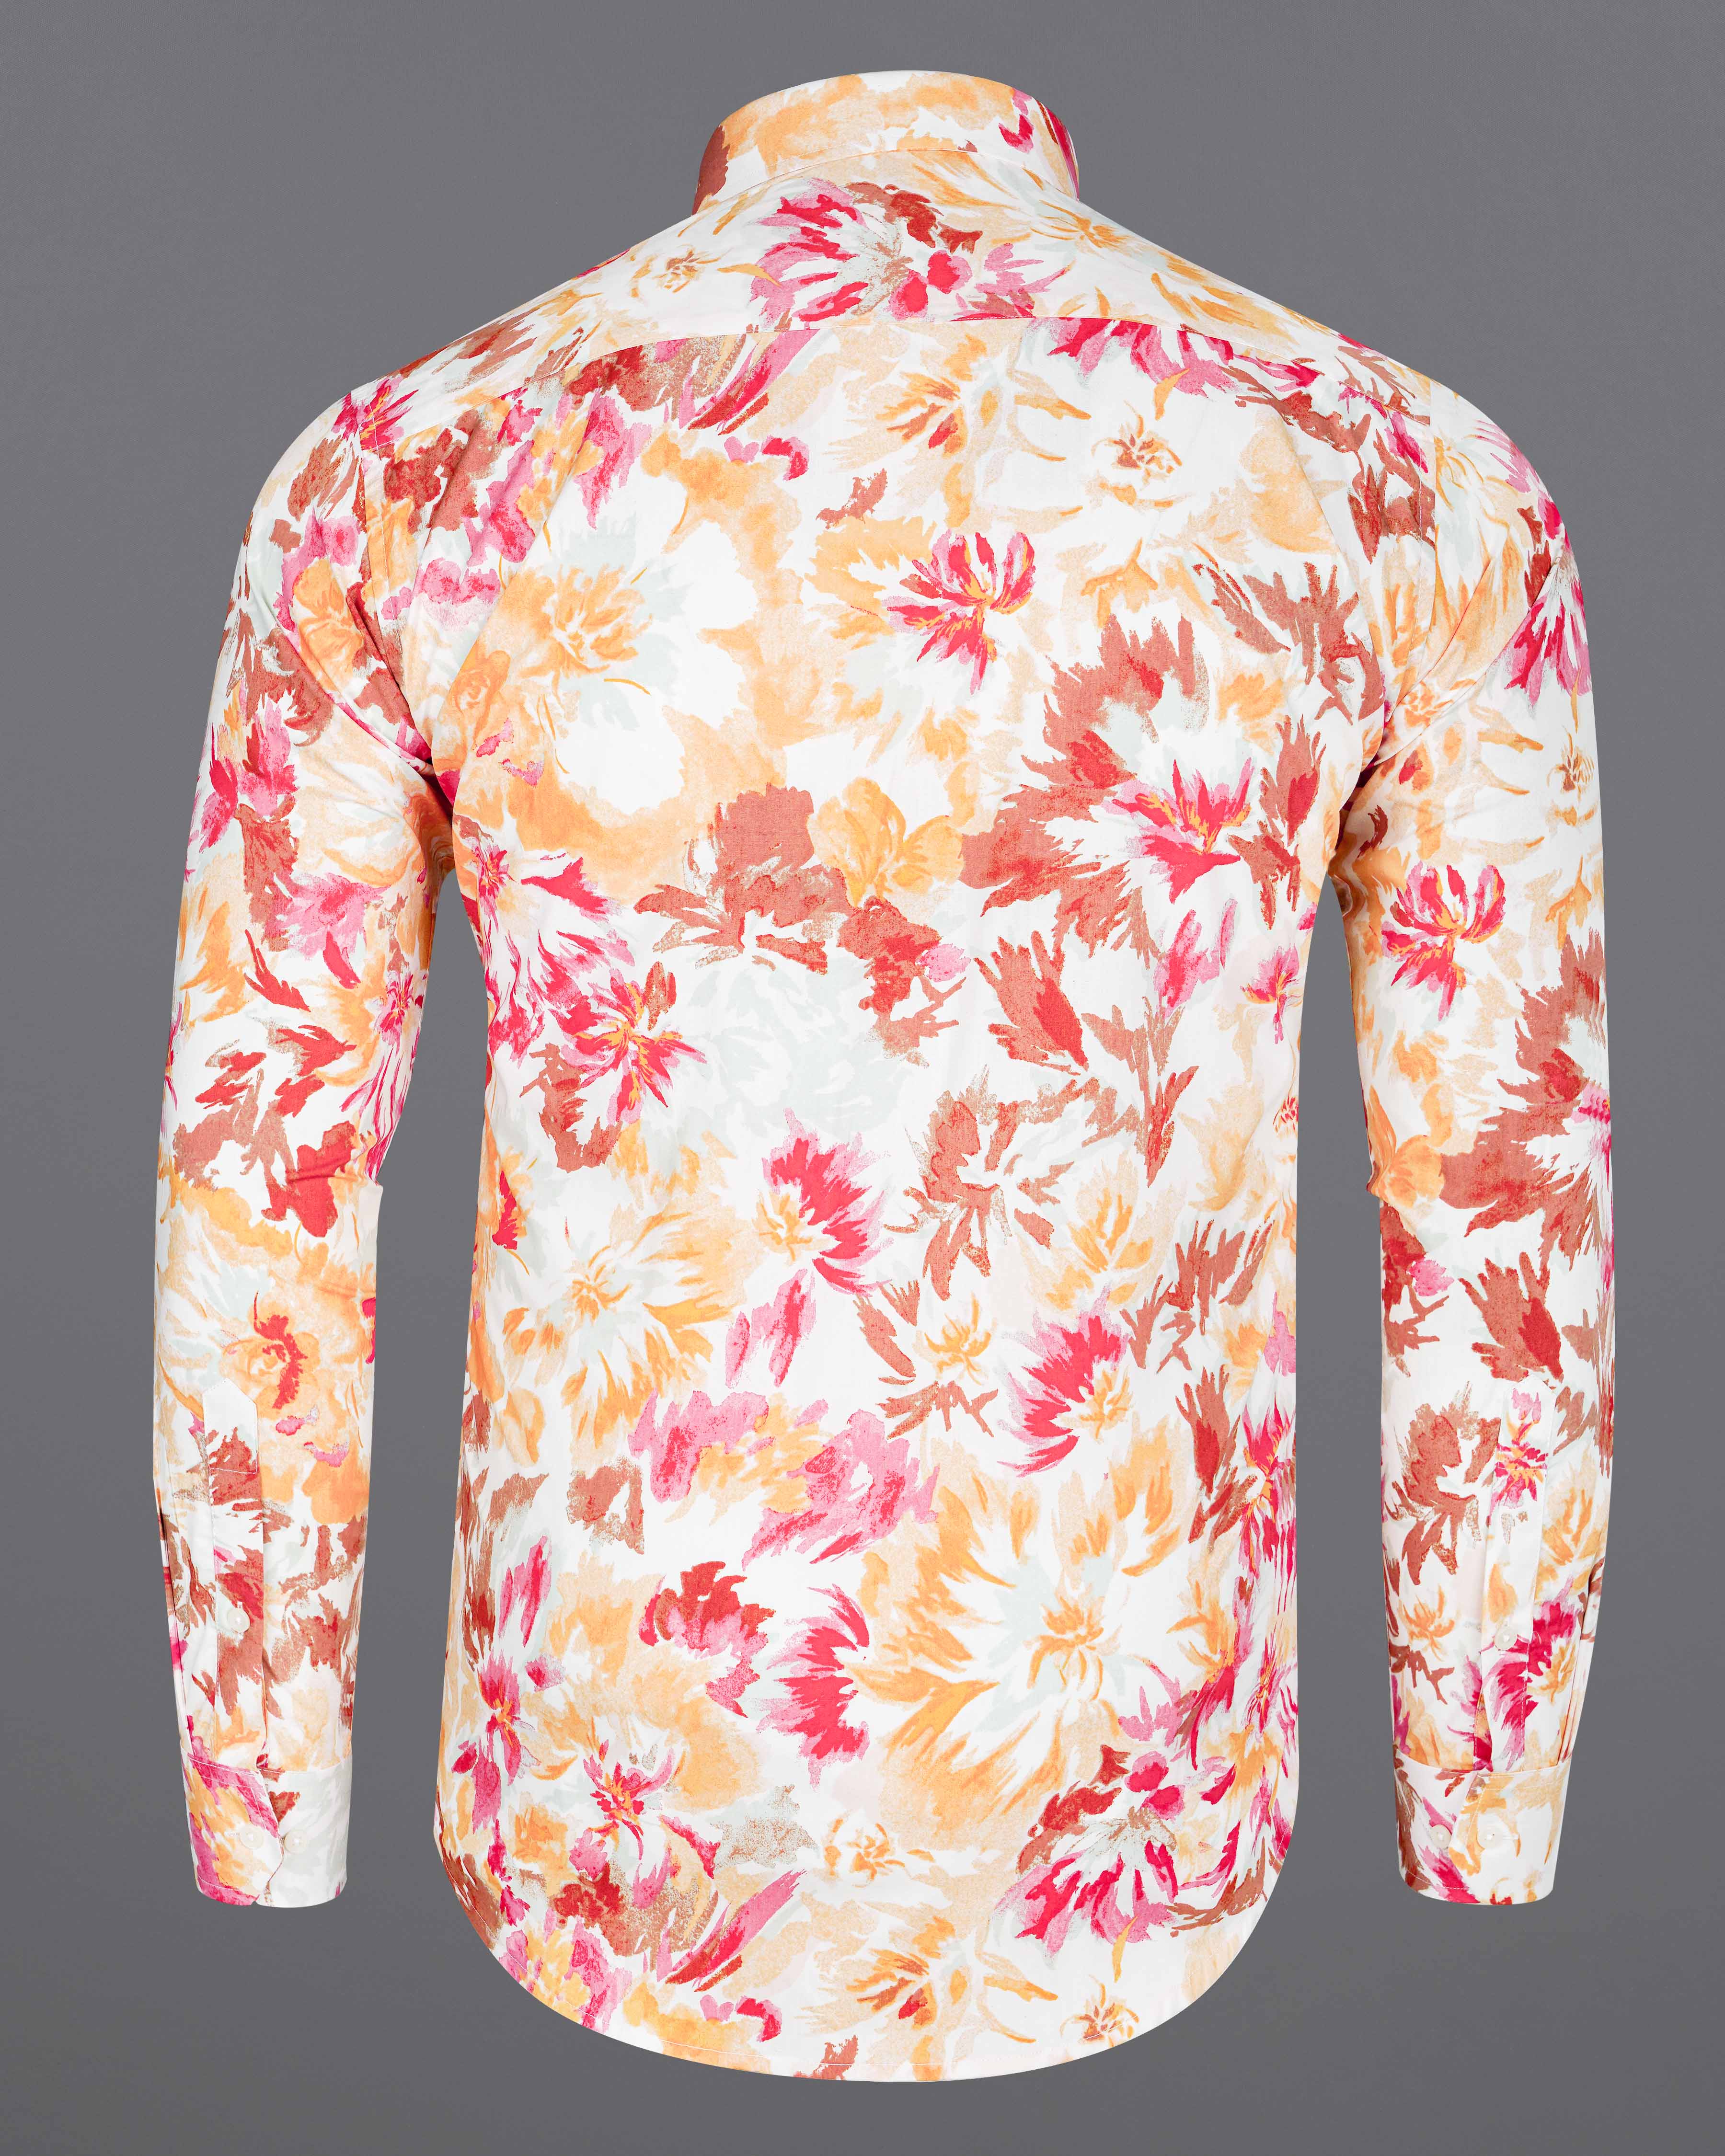 Bright White with Casablanca Yellow and Faded Red Floral Printed Premium Cotton Shirt 8073-38,8073-38,8073-39,8073-39,8073-40,8073-40,8073-42,8073-42,8073-44,8073-44,8073-46,8073-46,8073-48,8073-48,8073-50,8073-50,8073-52,8073-52